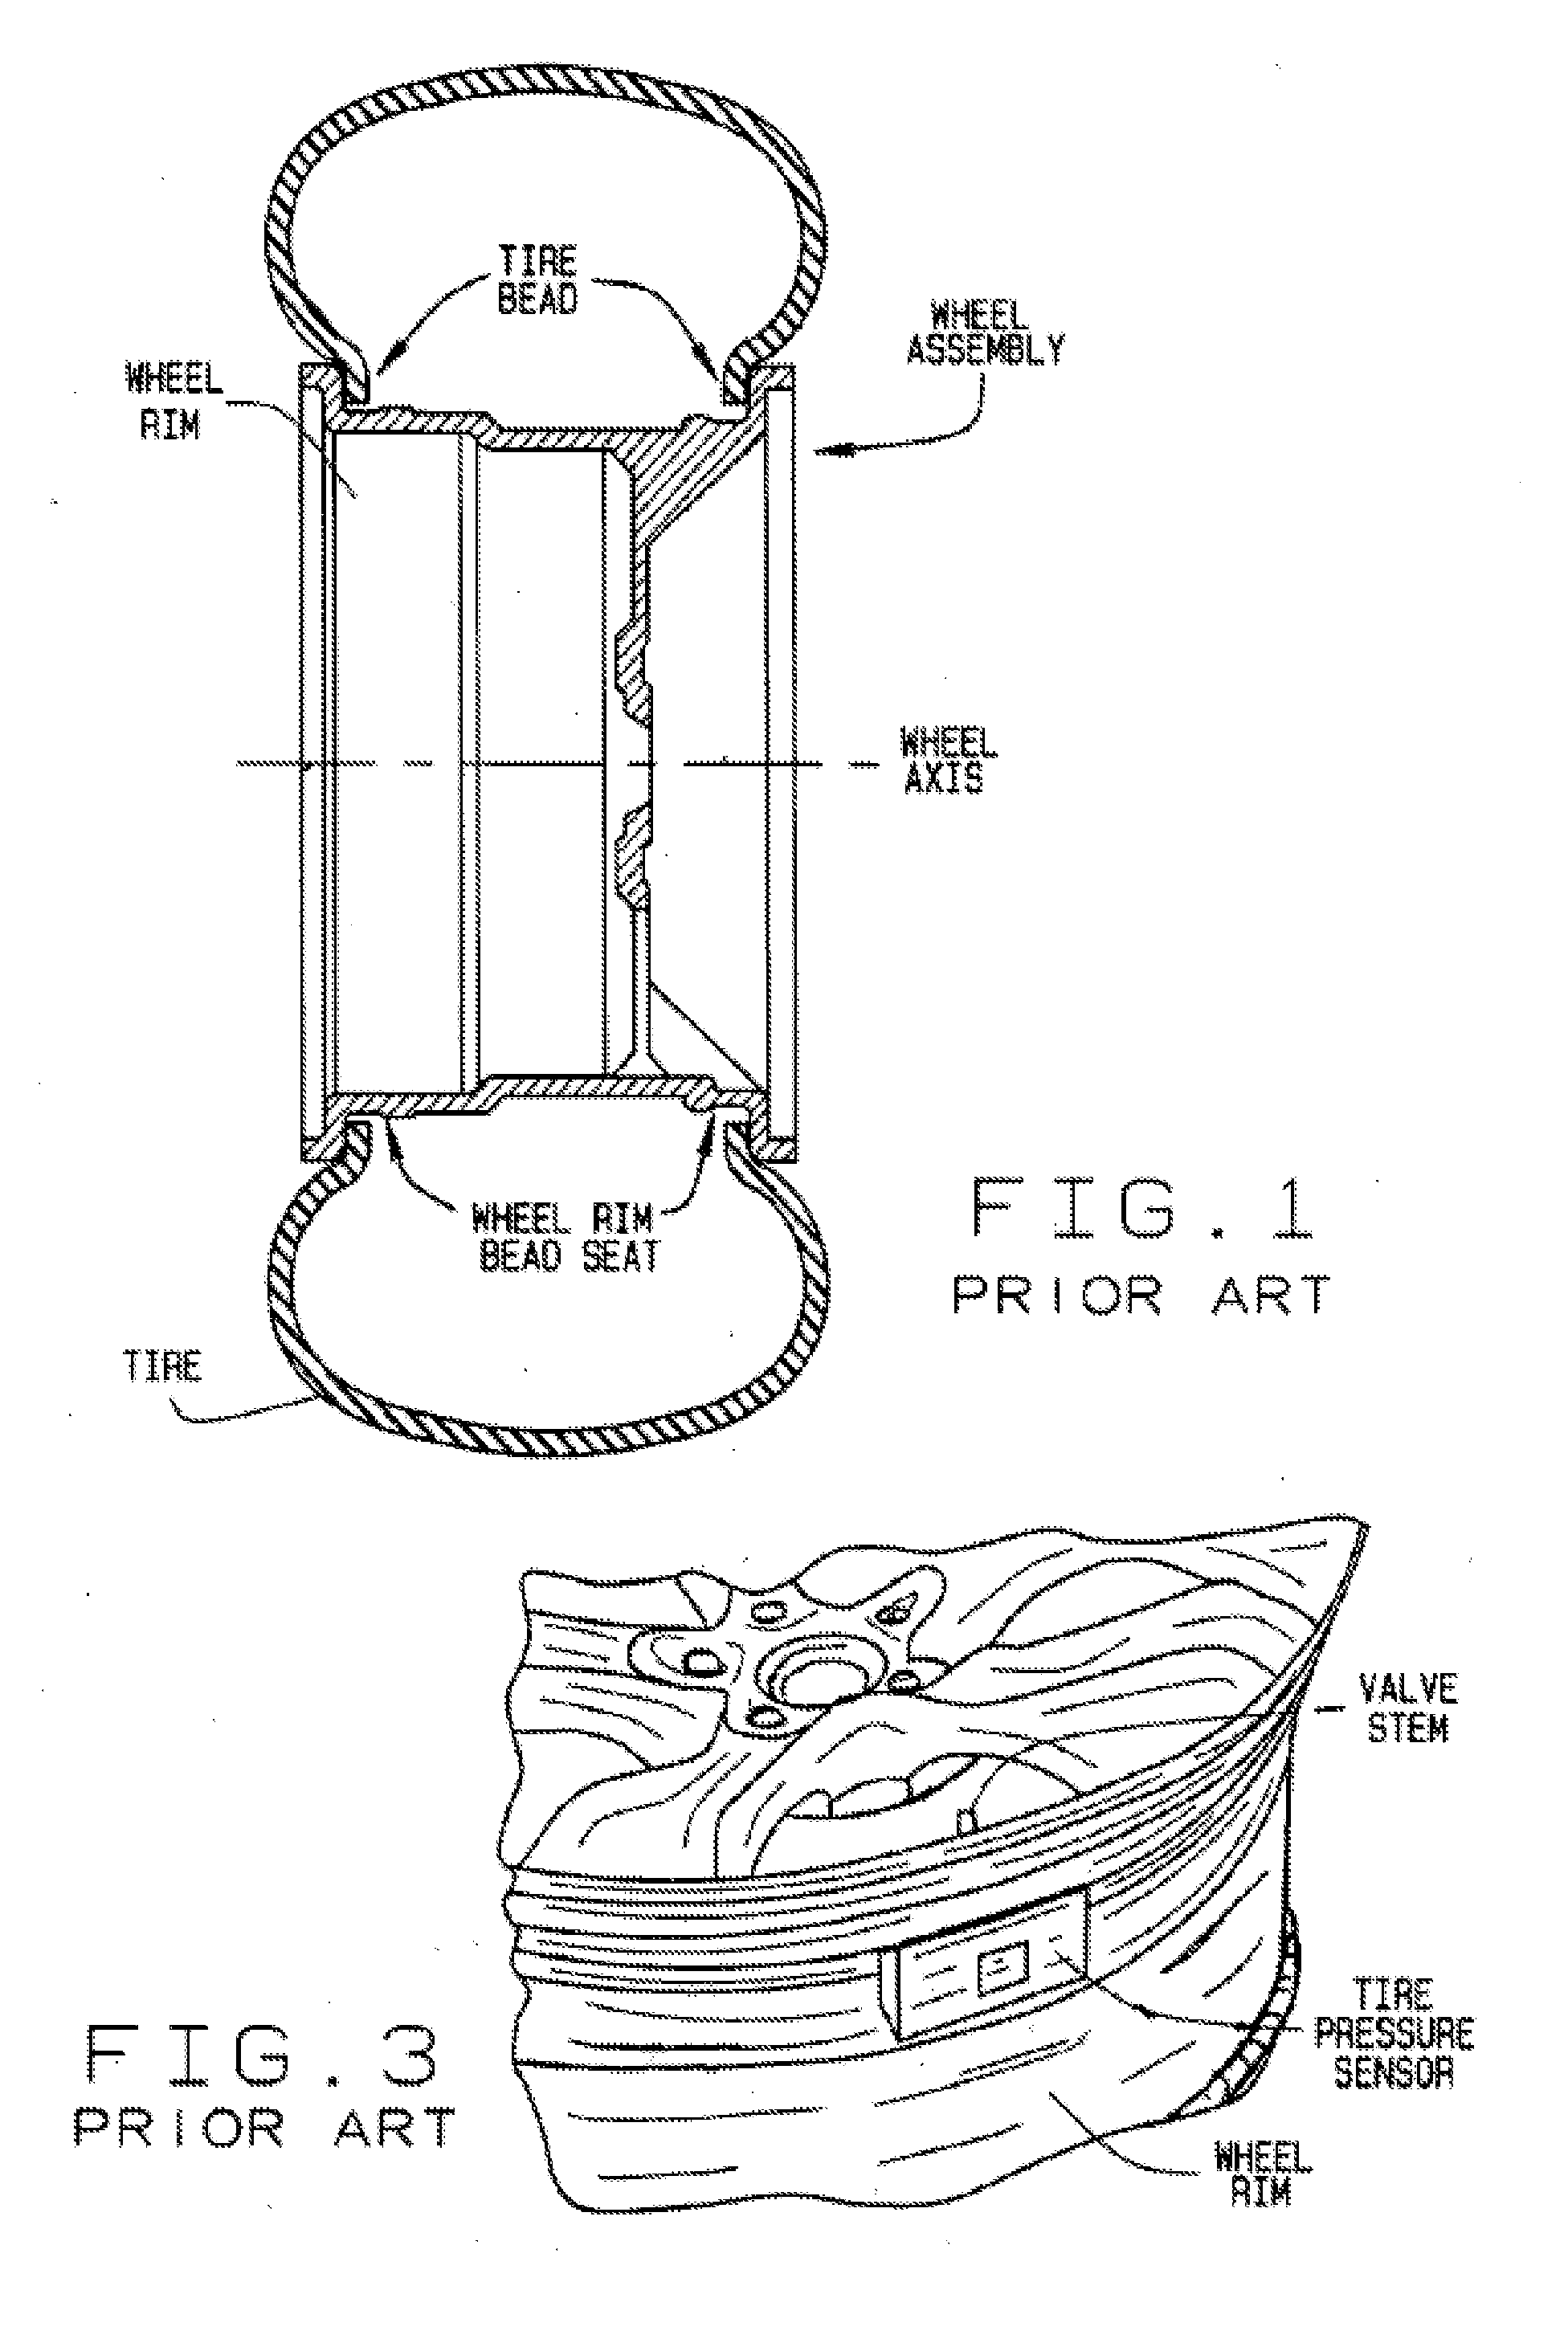 Integrated Tire Pressure Diagnostic System and Method